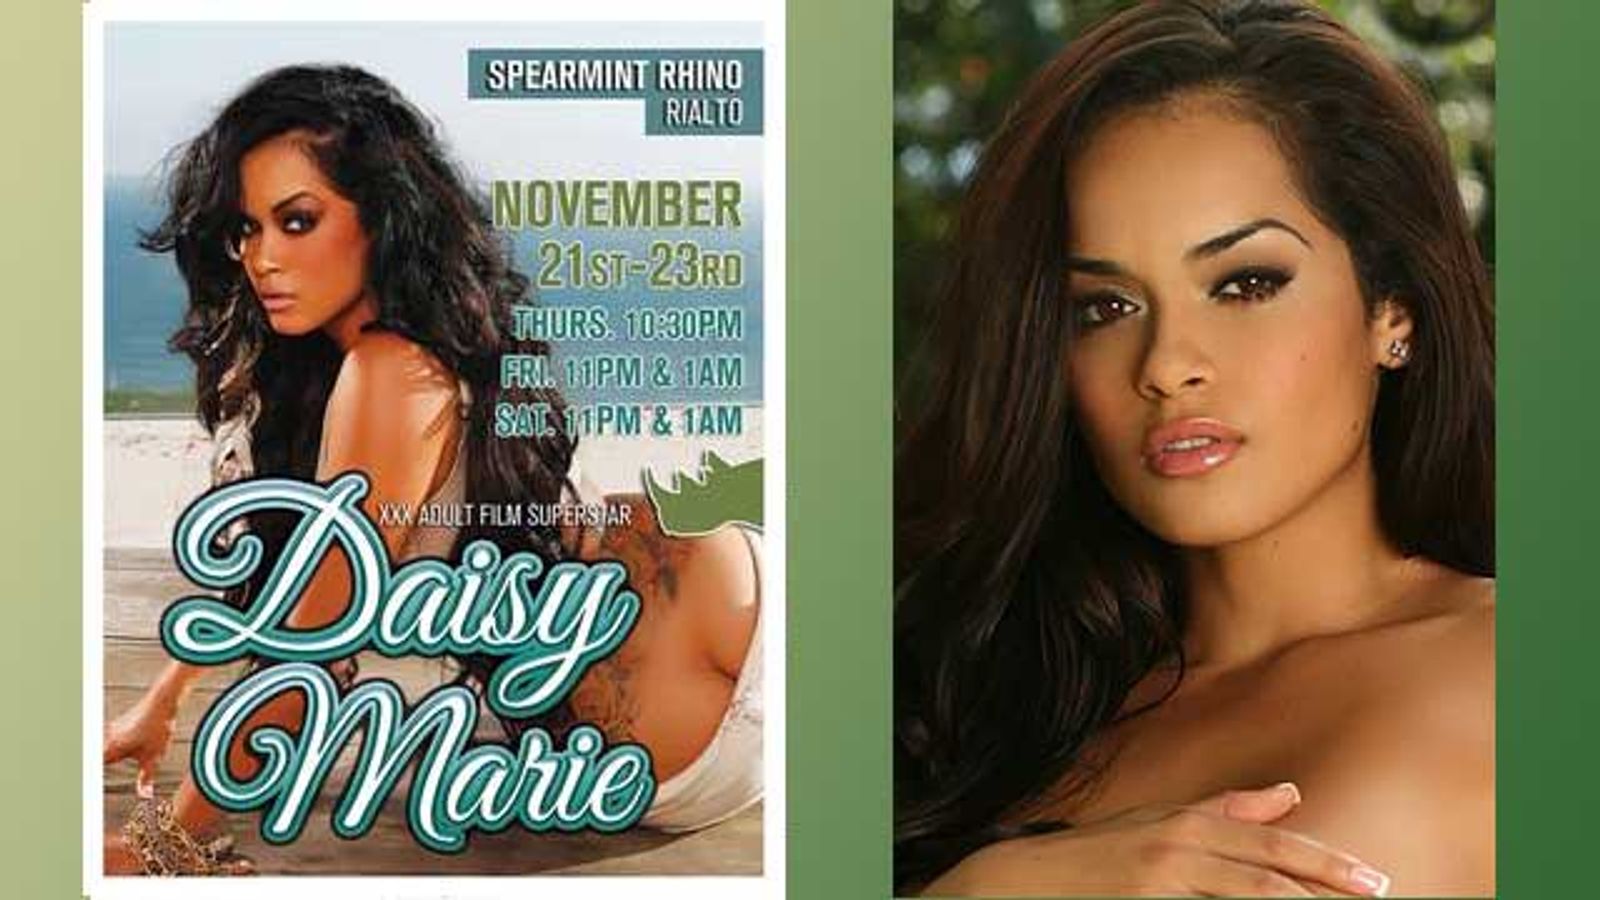 Daisy Marie Feature-Dancing This Weekend in Rialto